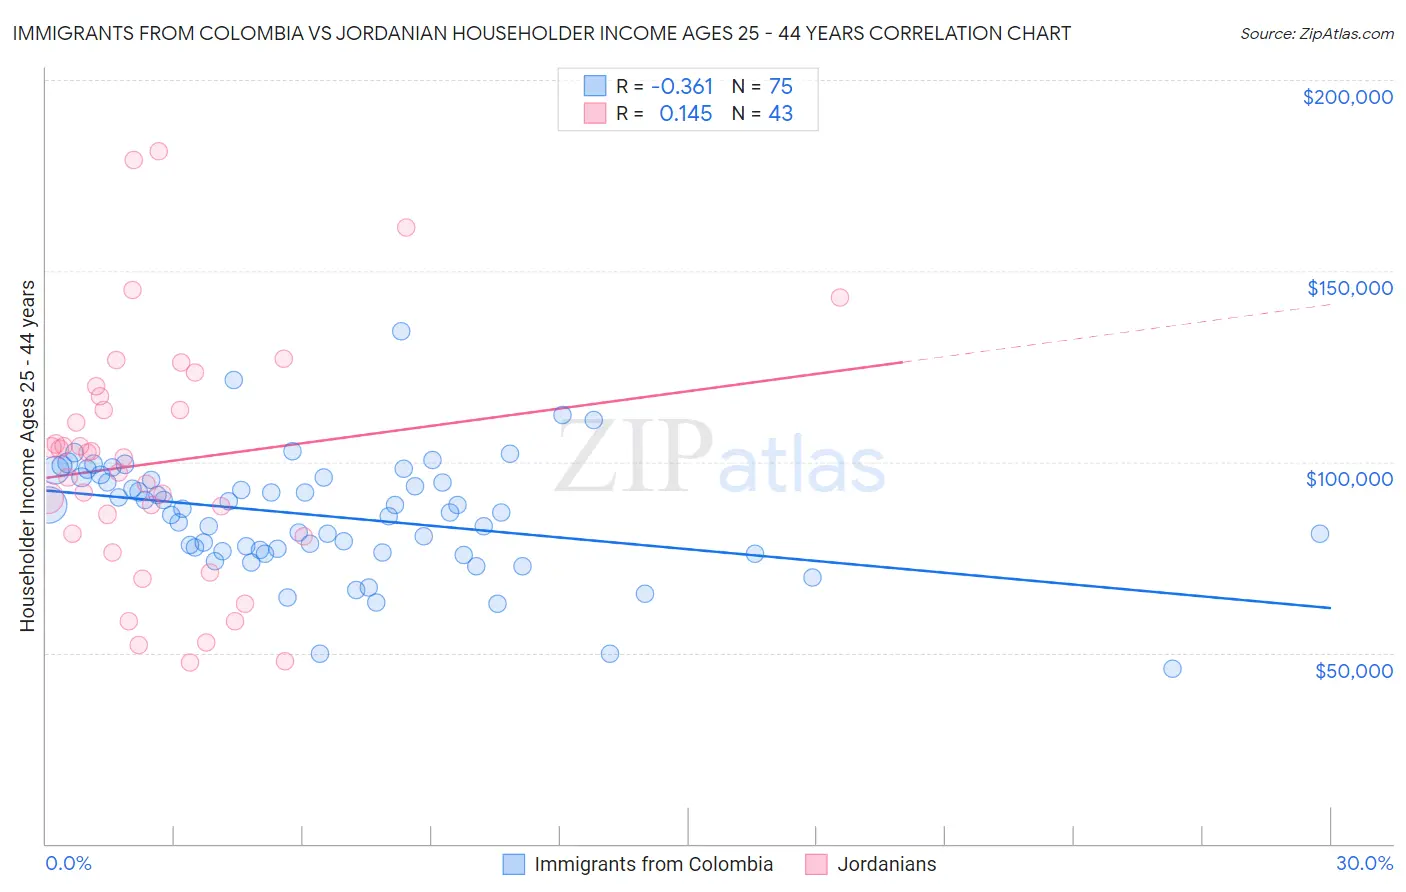 Immigrants from Colombia vs Jordanian Householder Income Ages 25 - 44 years